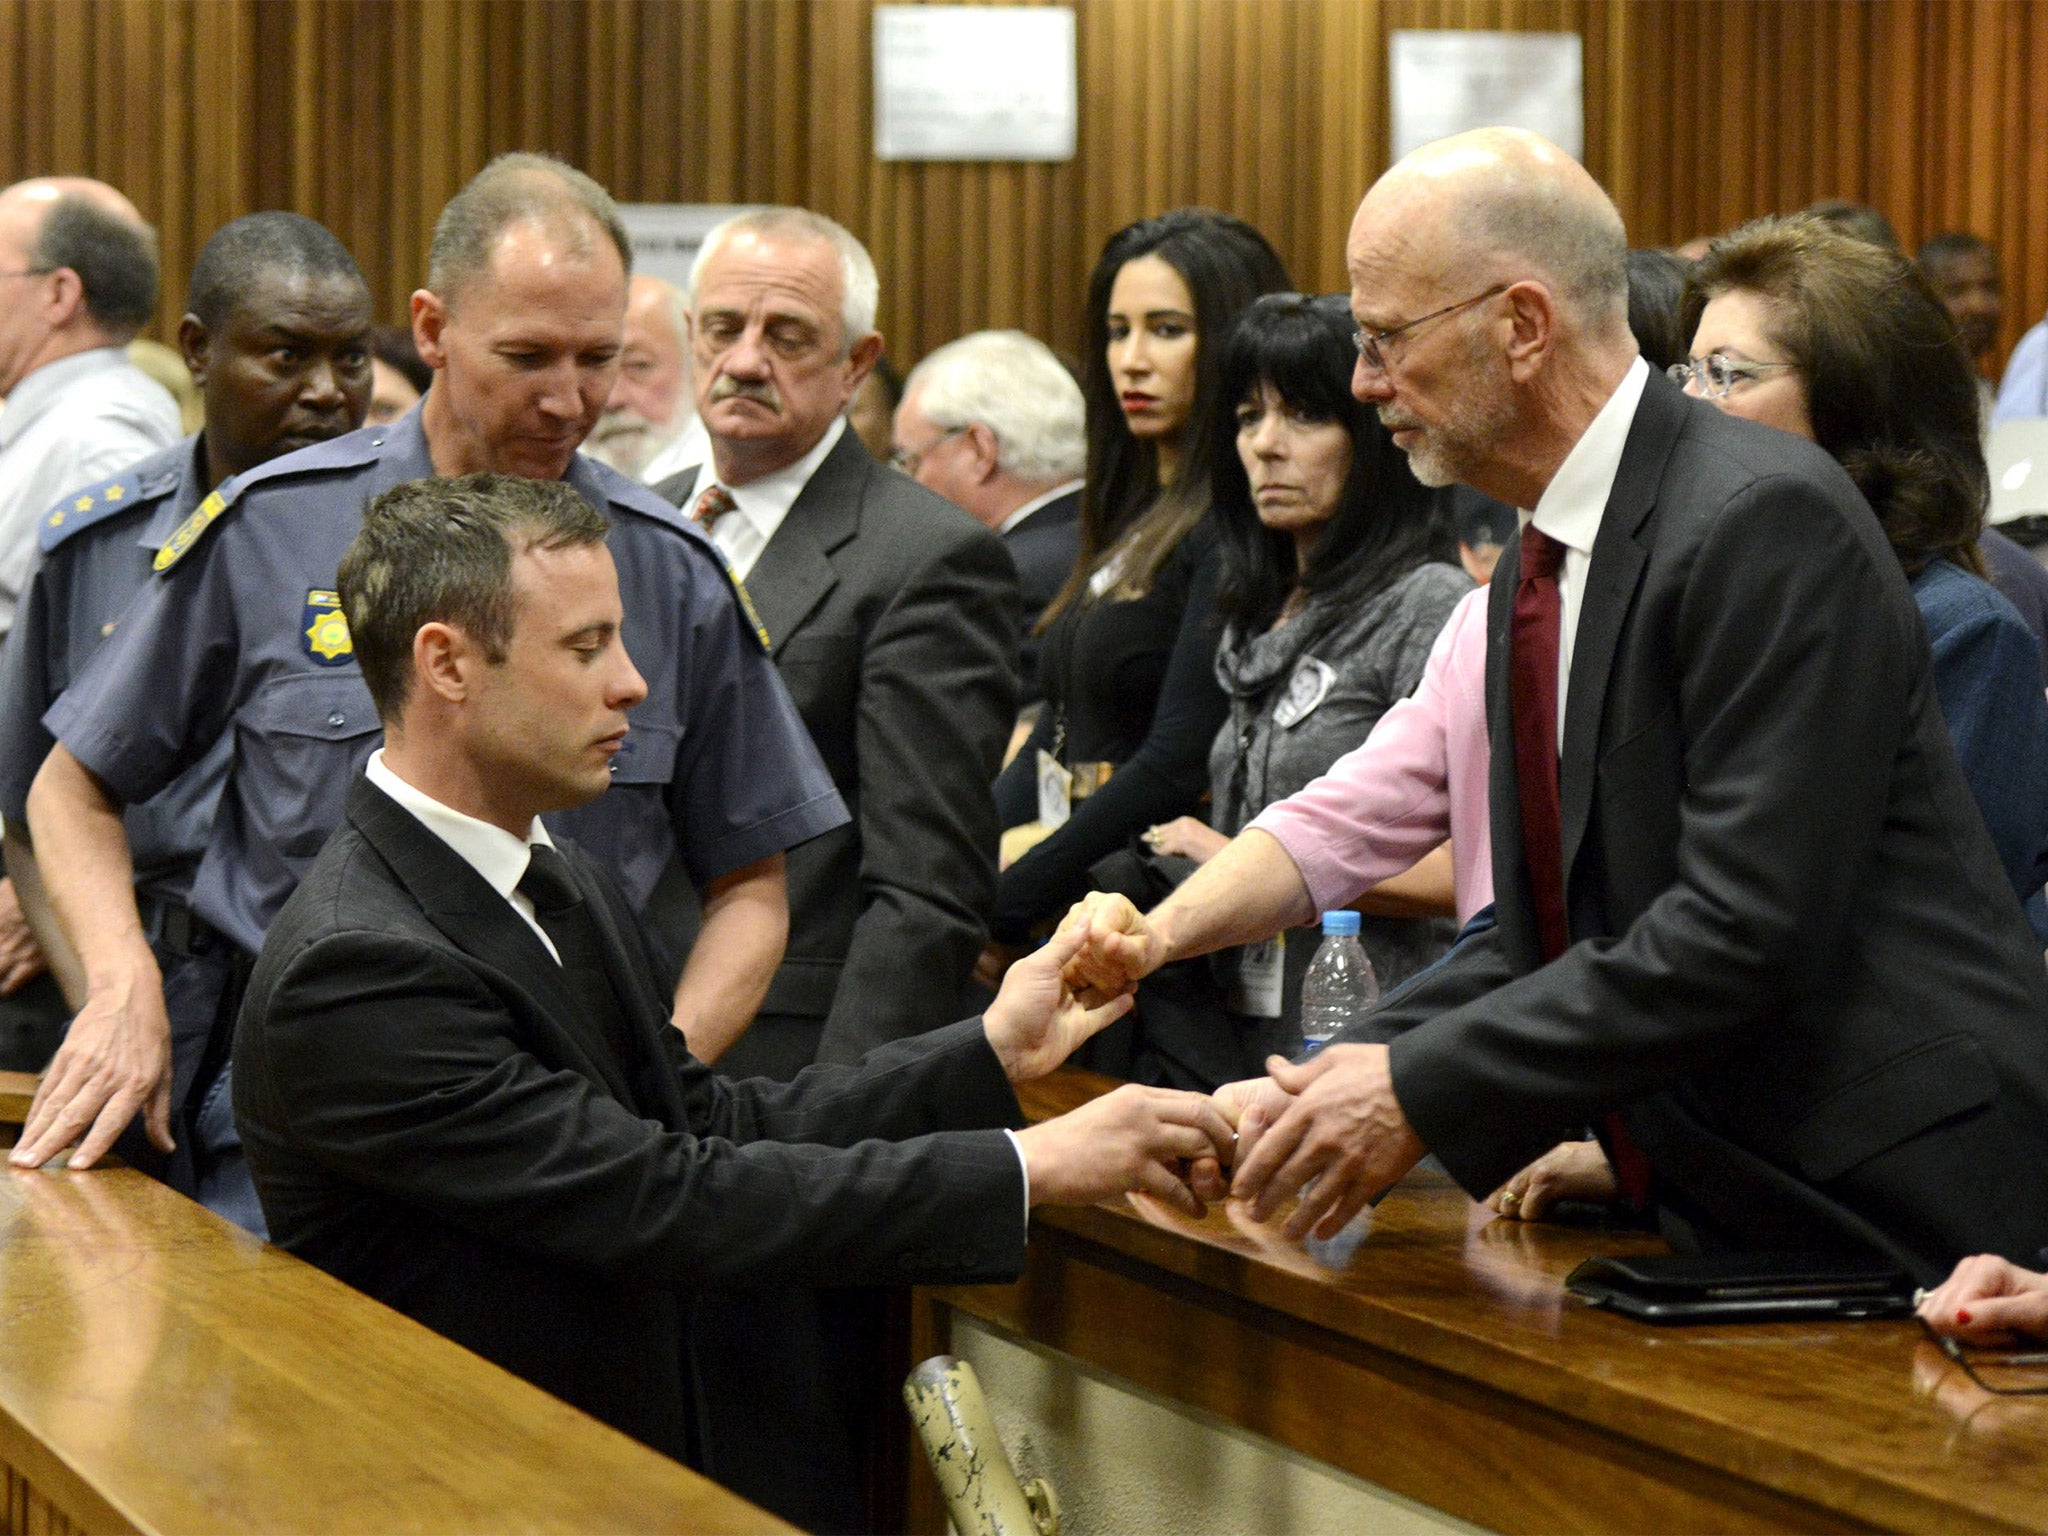 Oscar Pistorius briefly holds the hand of his uncle Arnold as he is taken to the holding cells after sentencing